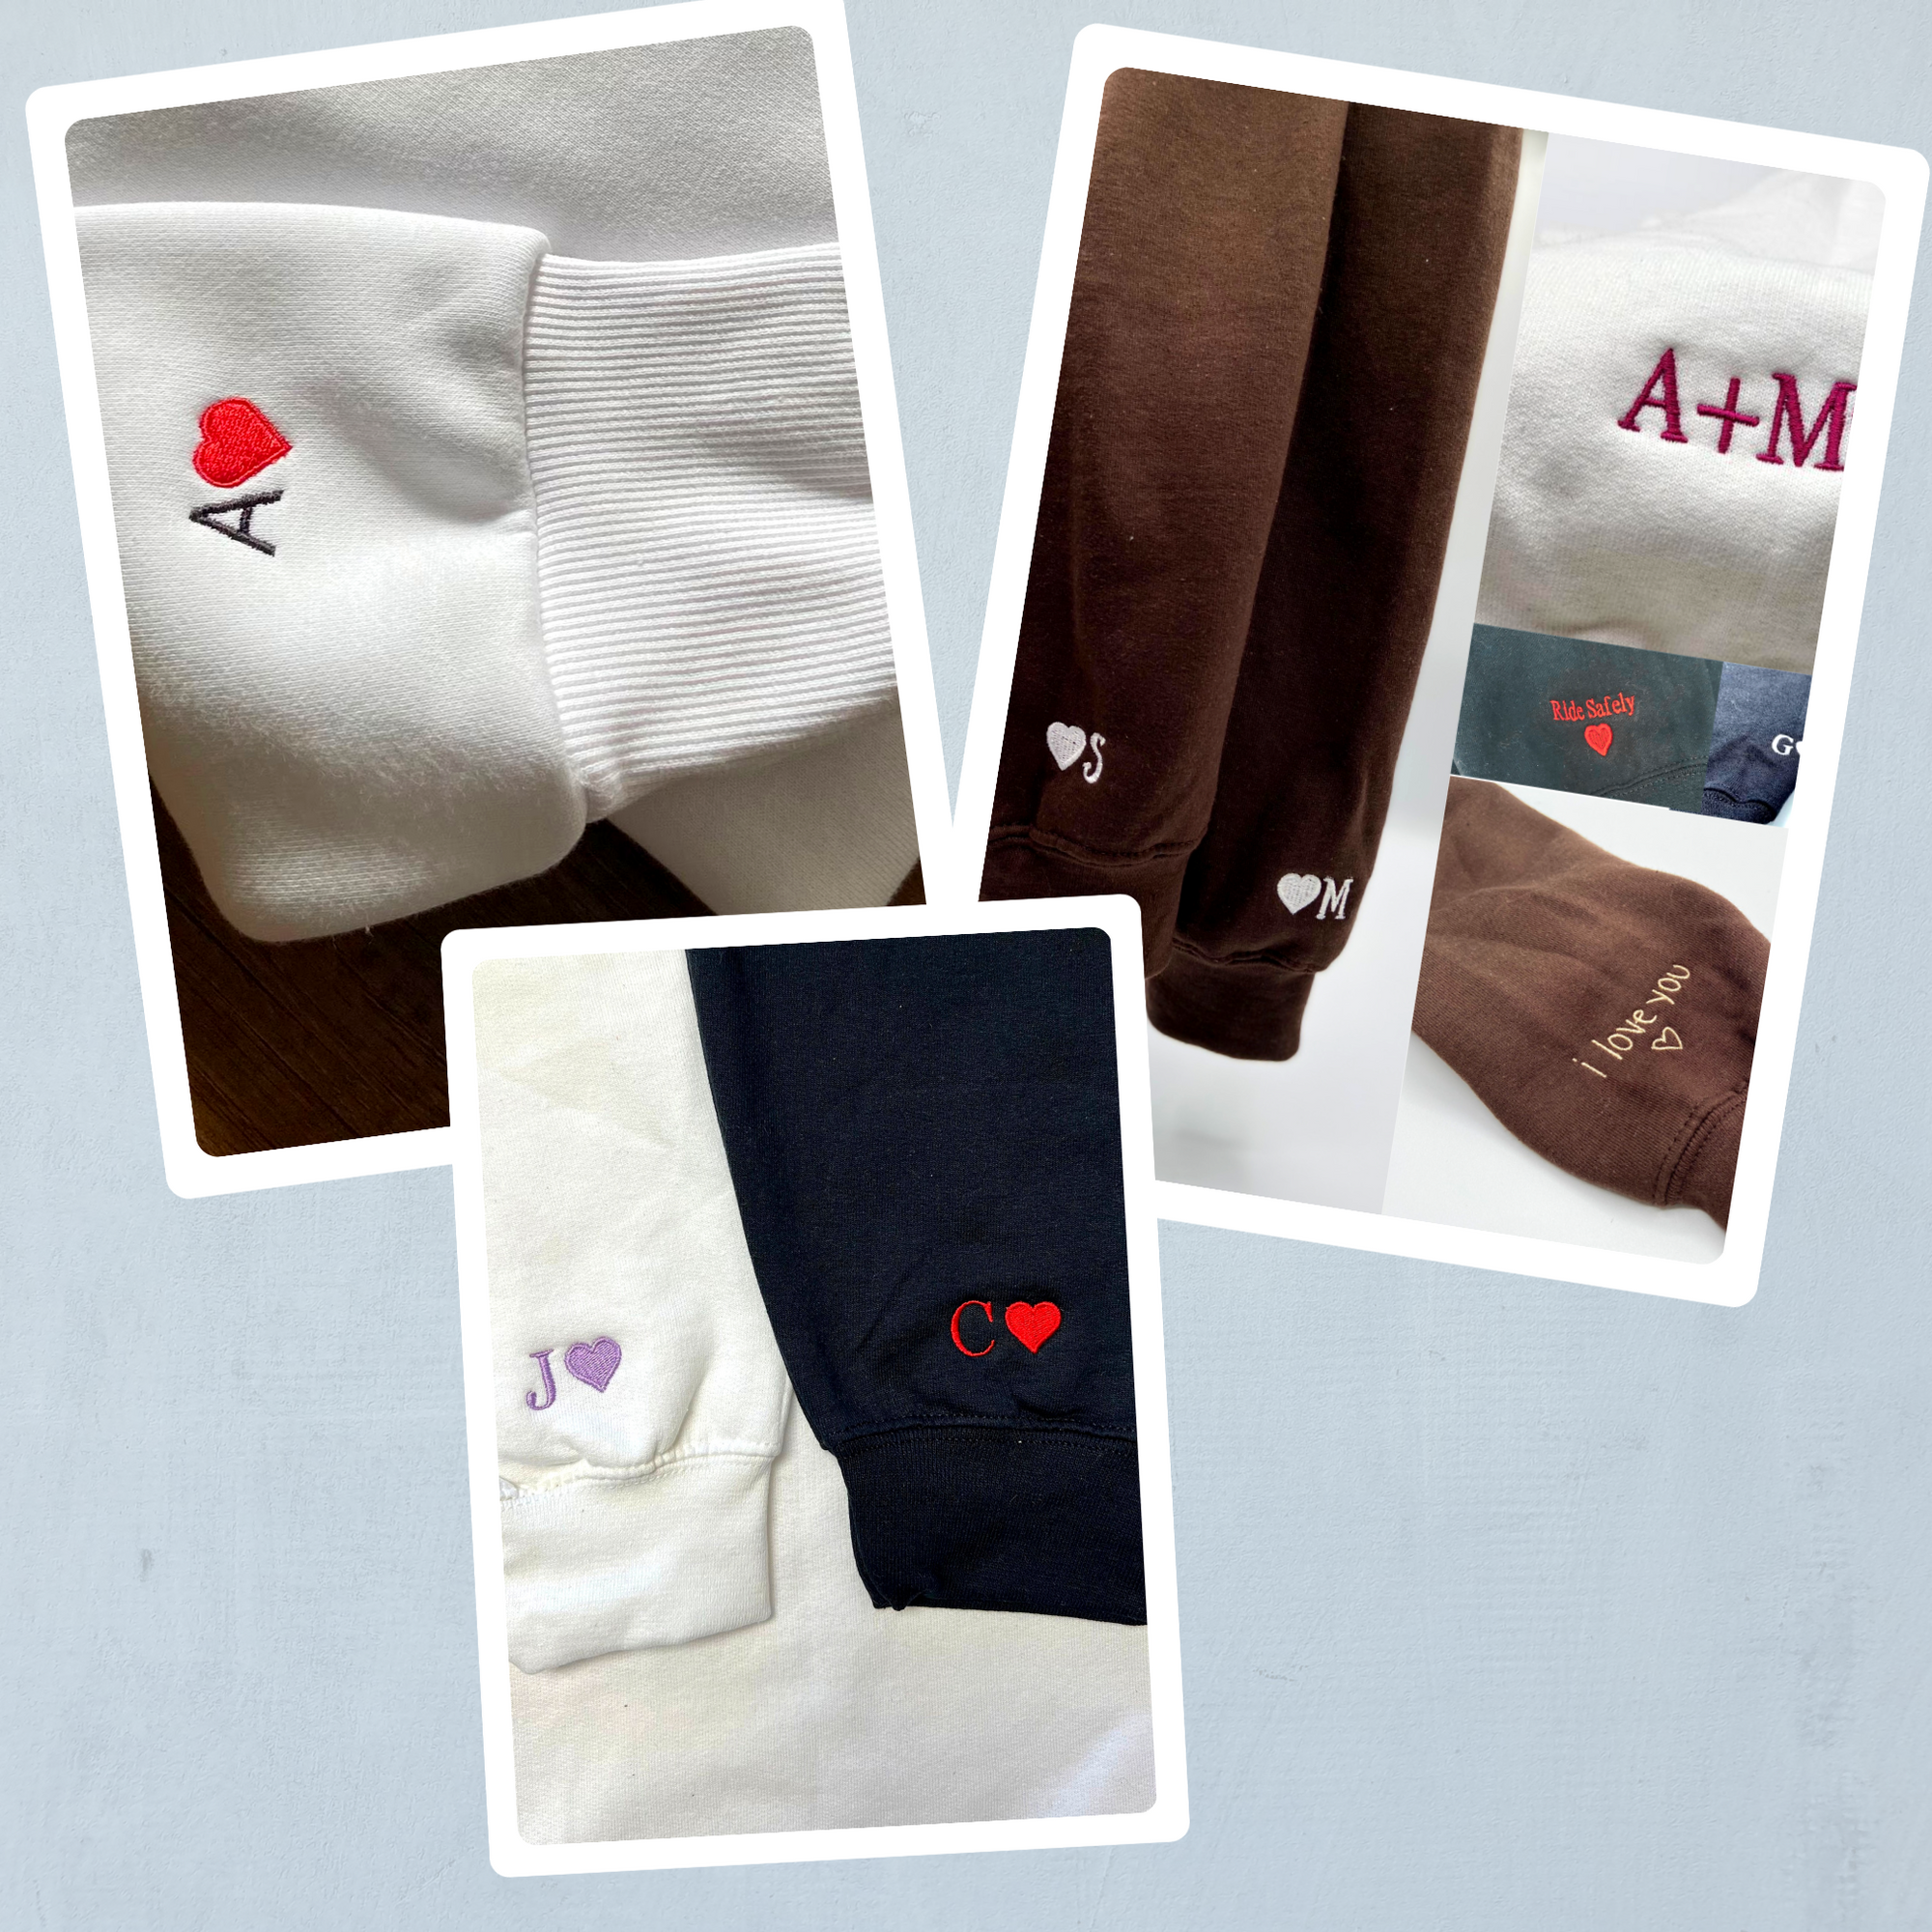 Custom Embroidered Hoodies For Couples, Cute Cartoon Princess Couples Embroidered Hoodie